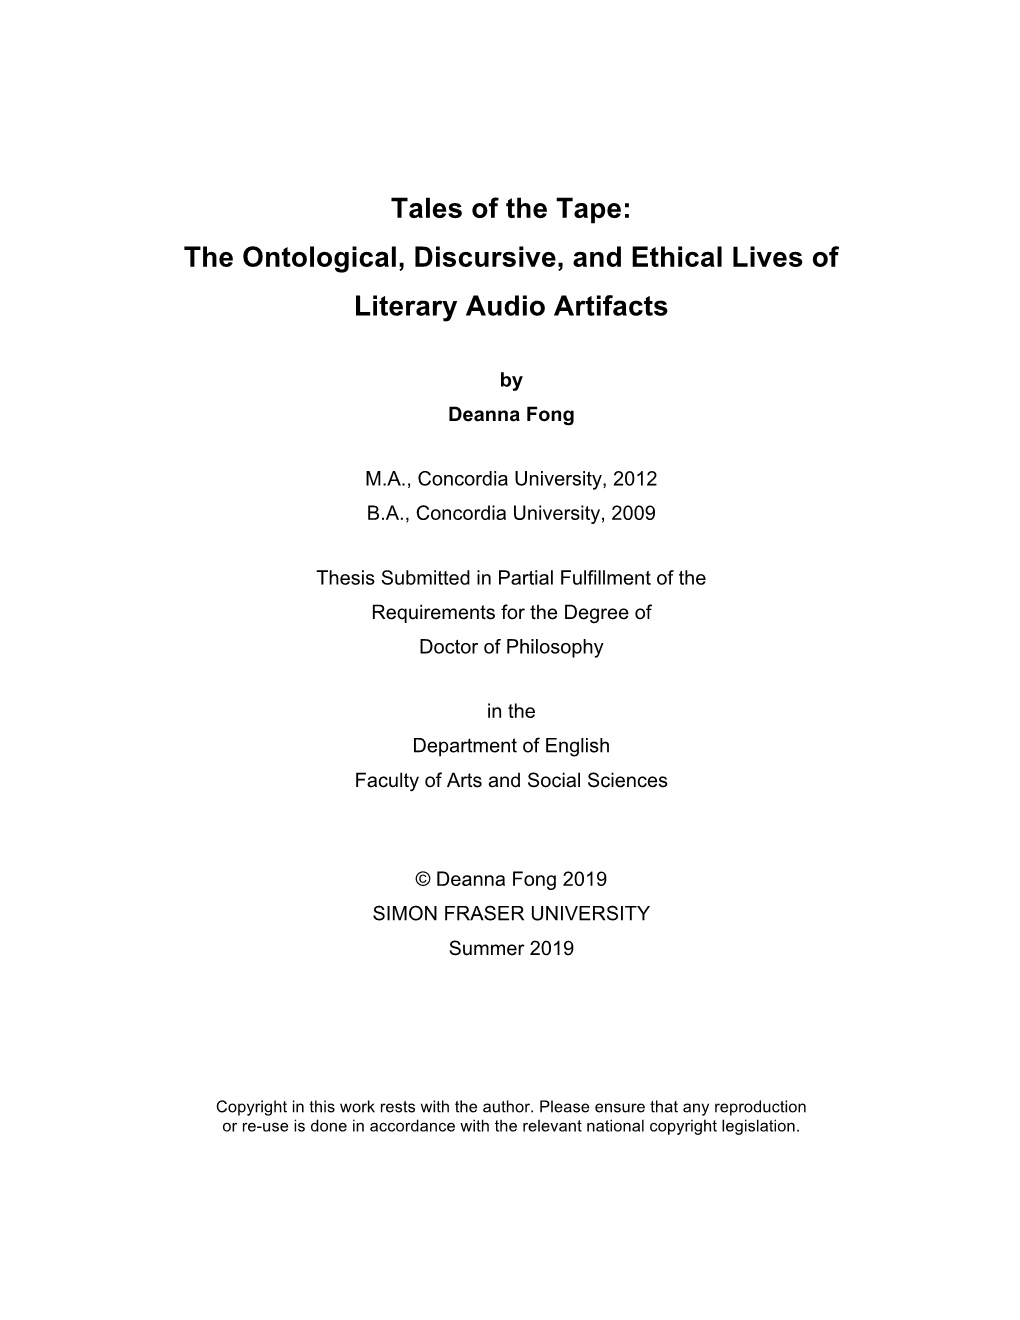 The Ontological, Discursive, and Ethical Lives of Literary Audio Artifacts